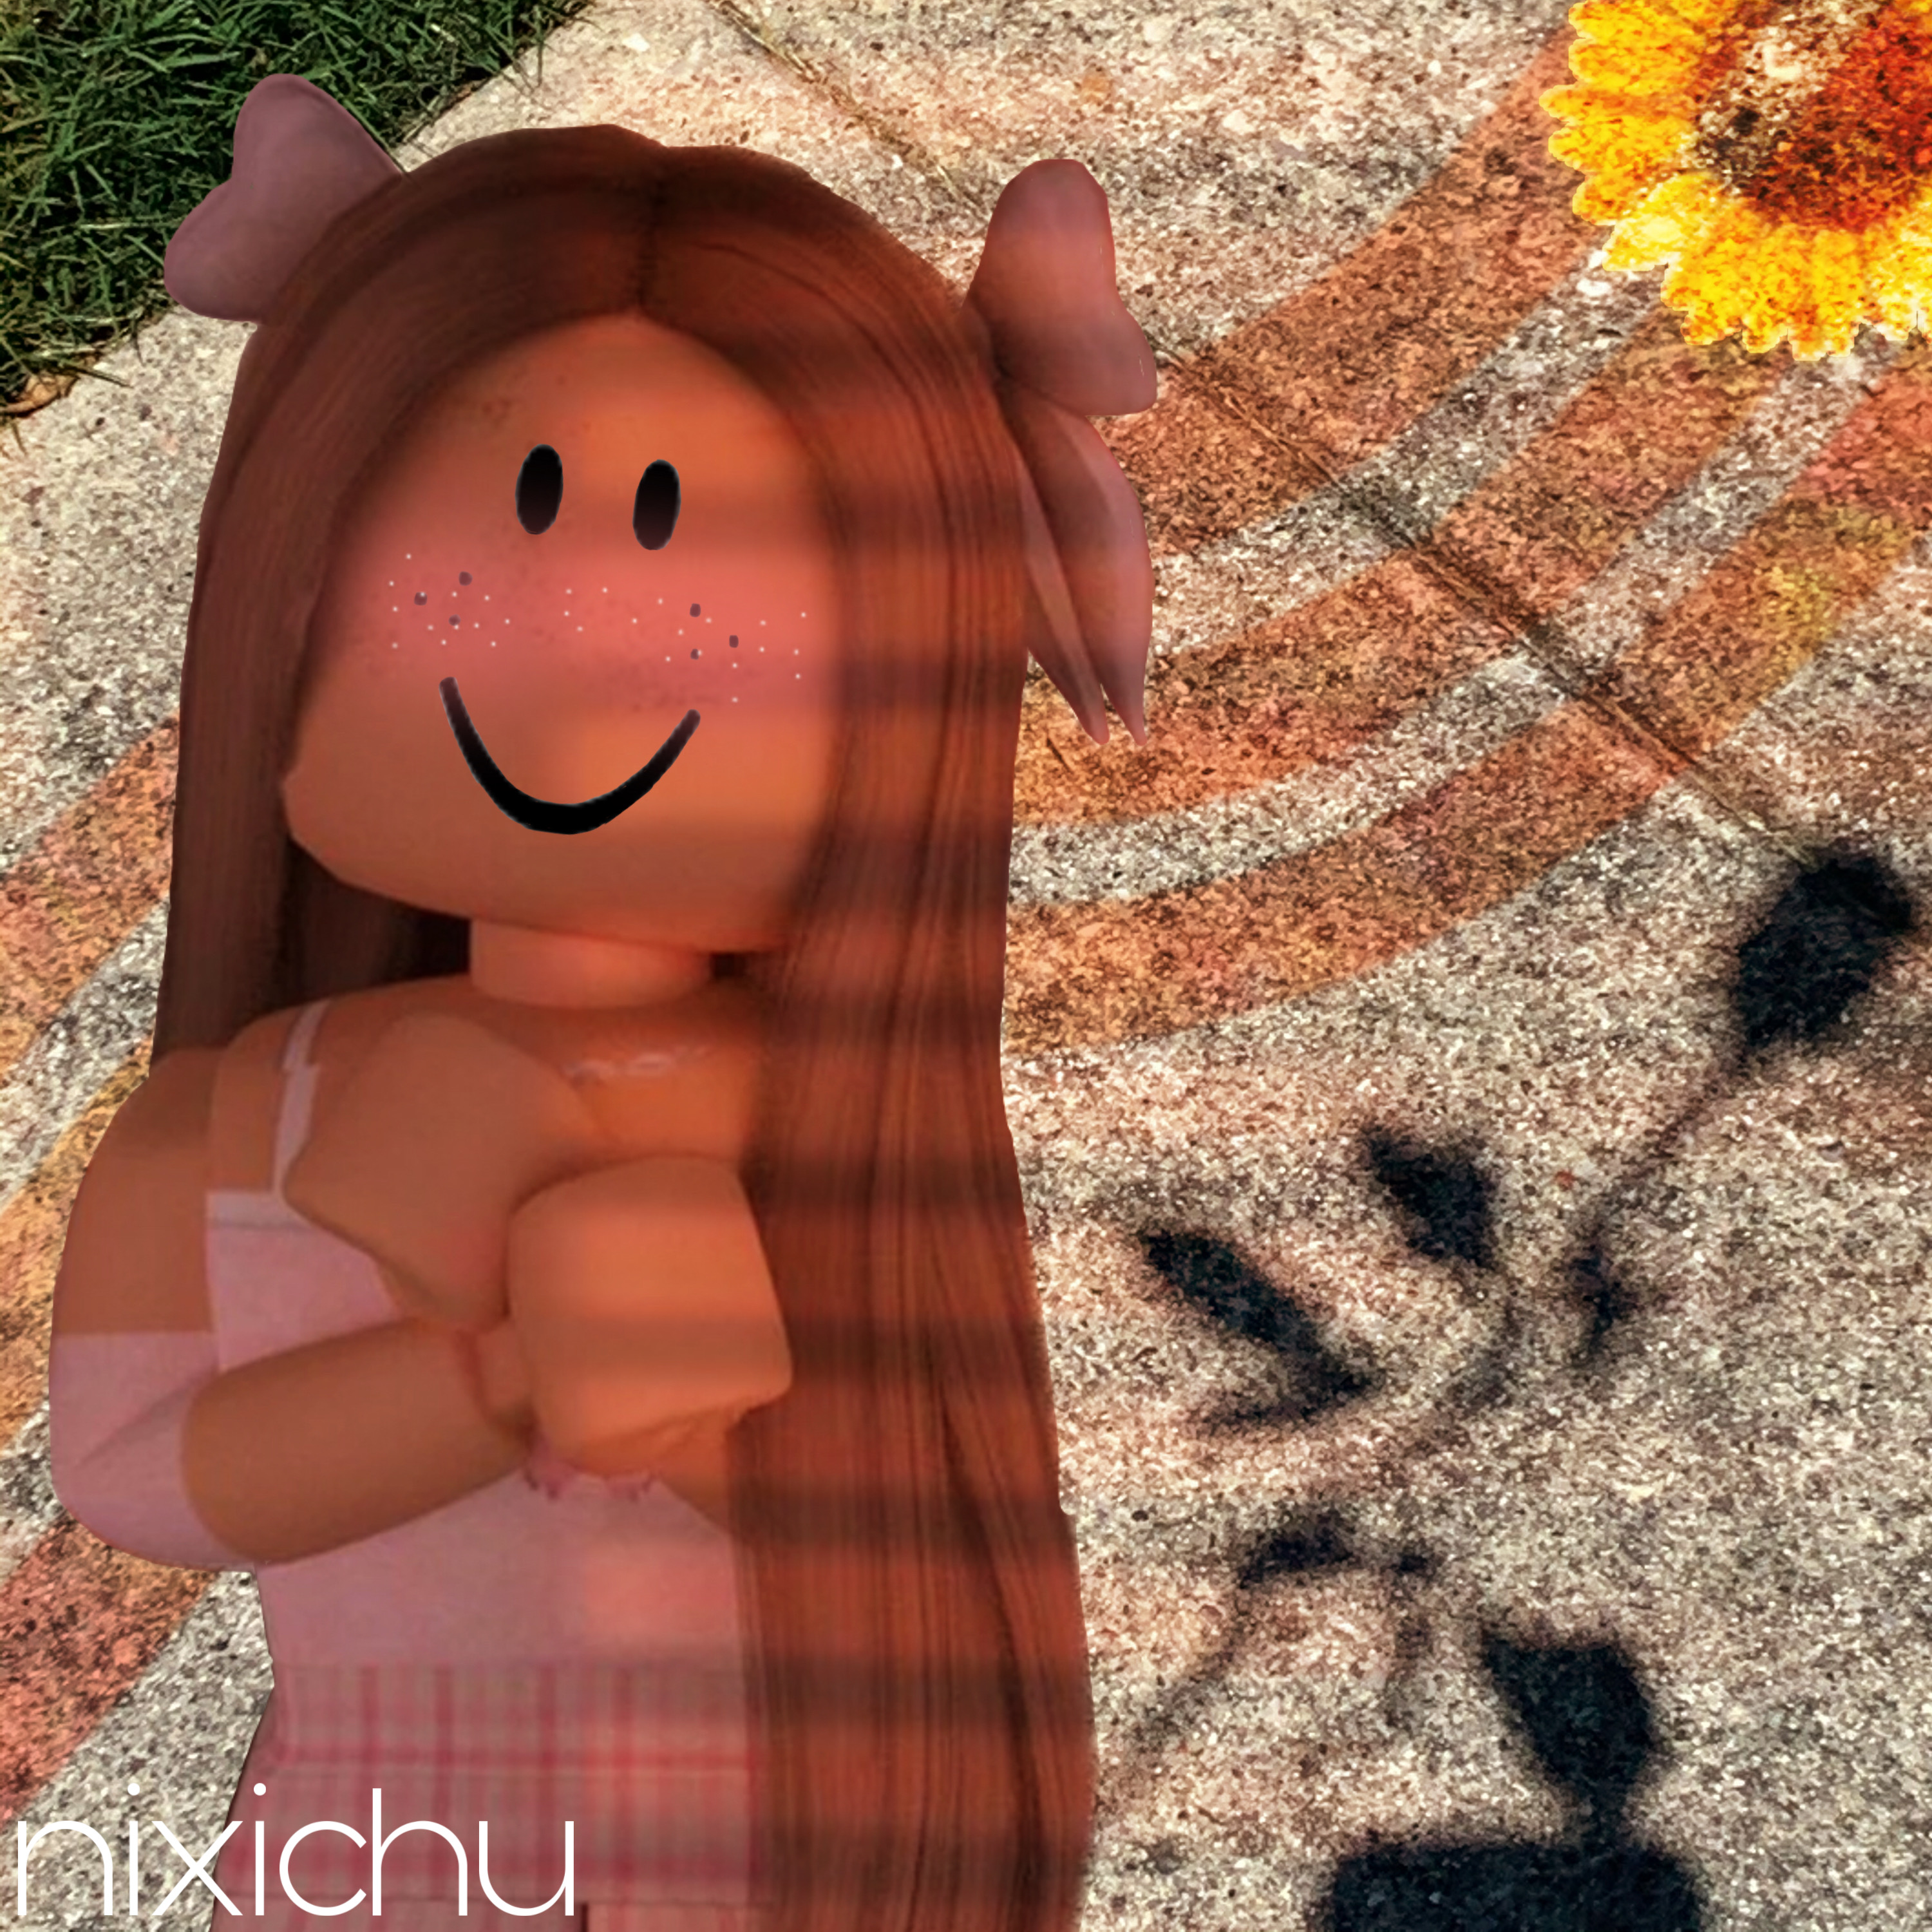 Robloxgfx Girl Robloxgirl Rblx Cute Image By Nixichu - roblox lol robloxgirl galaxy image by yuri